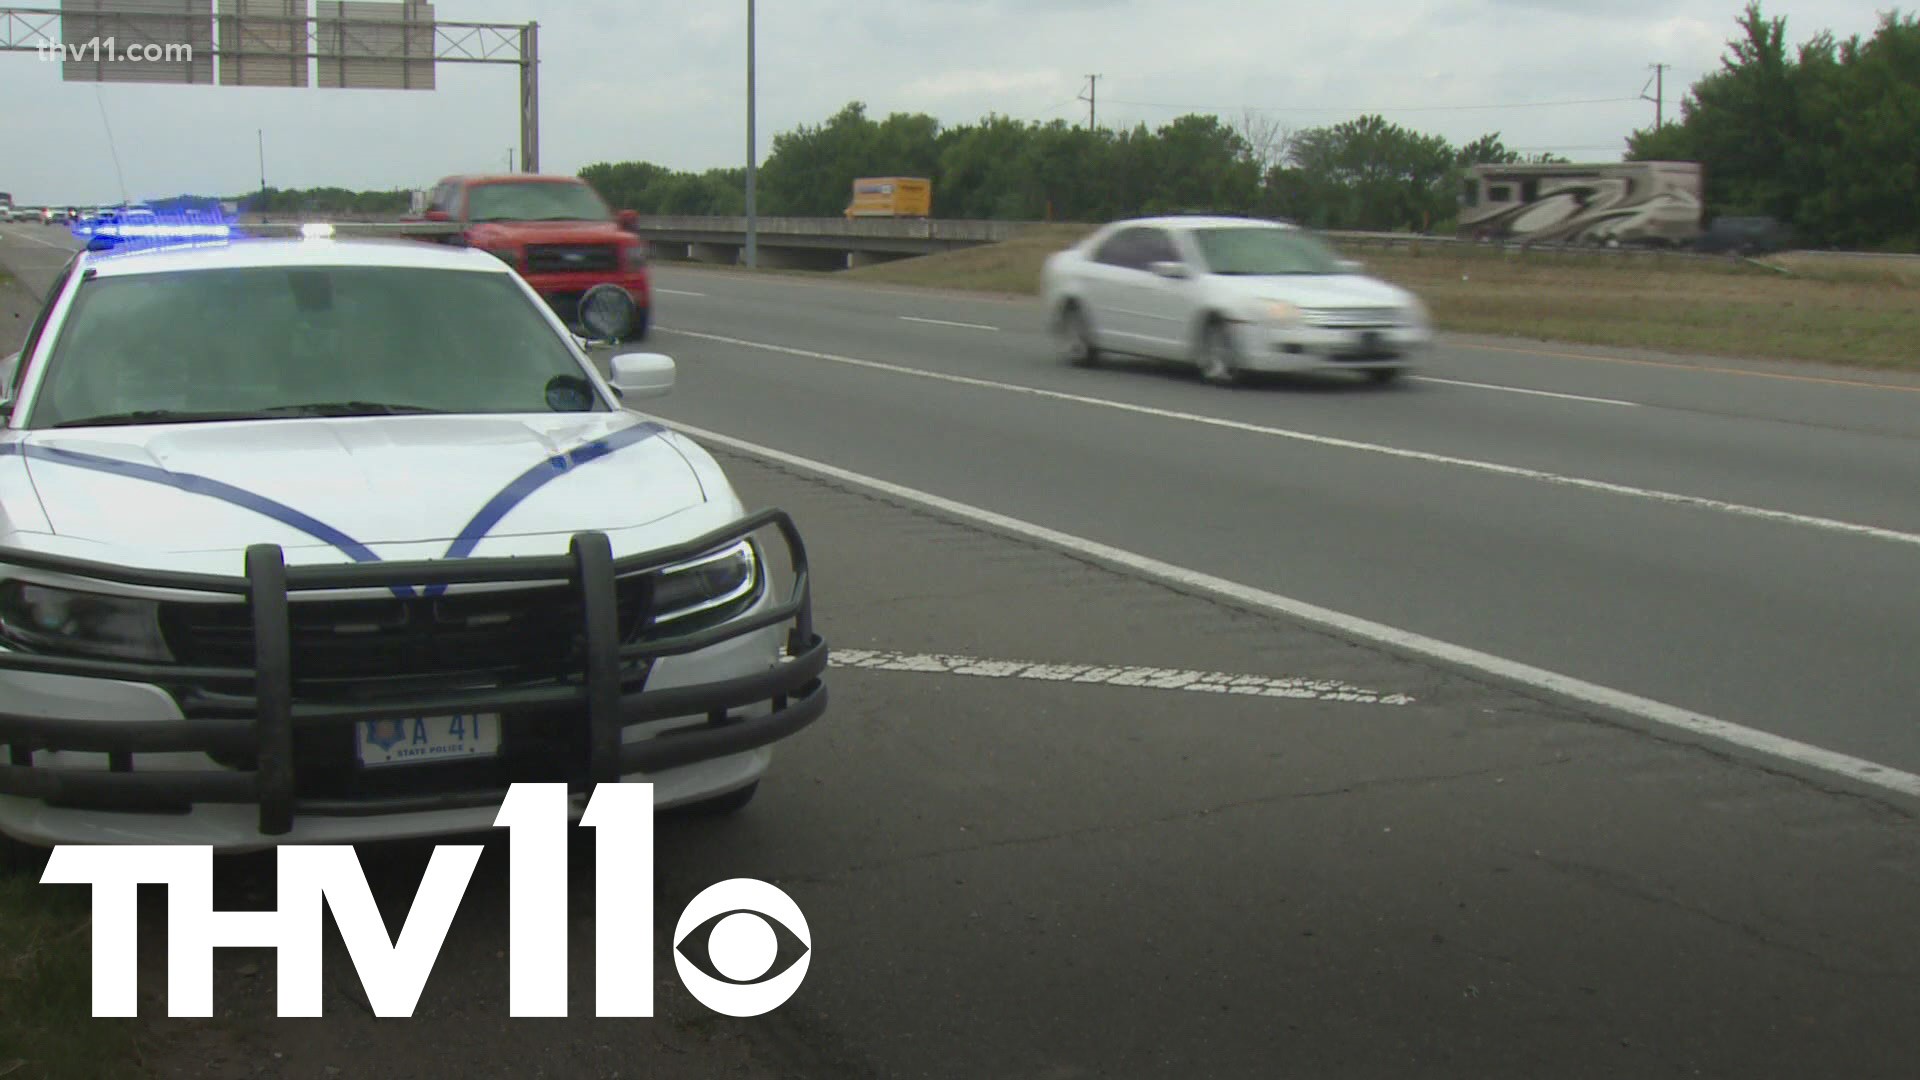 State police agencies cited more drivers for 100+ mph violations as many took advantage of light traffic.